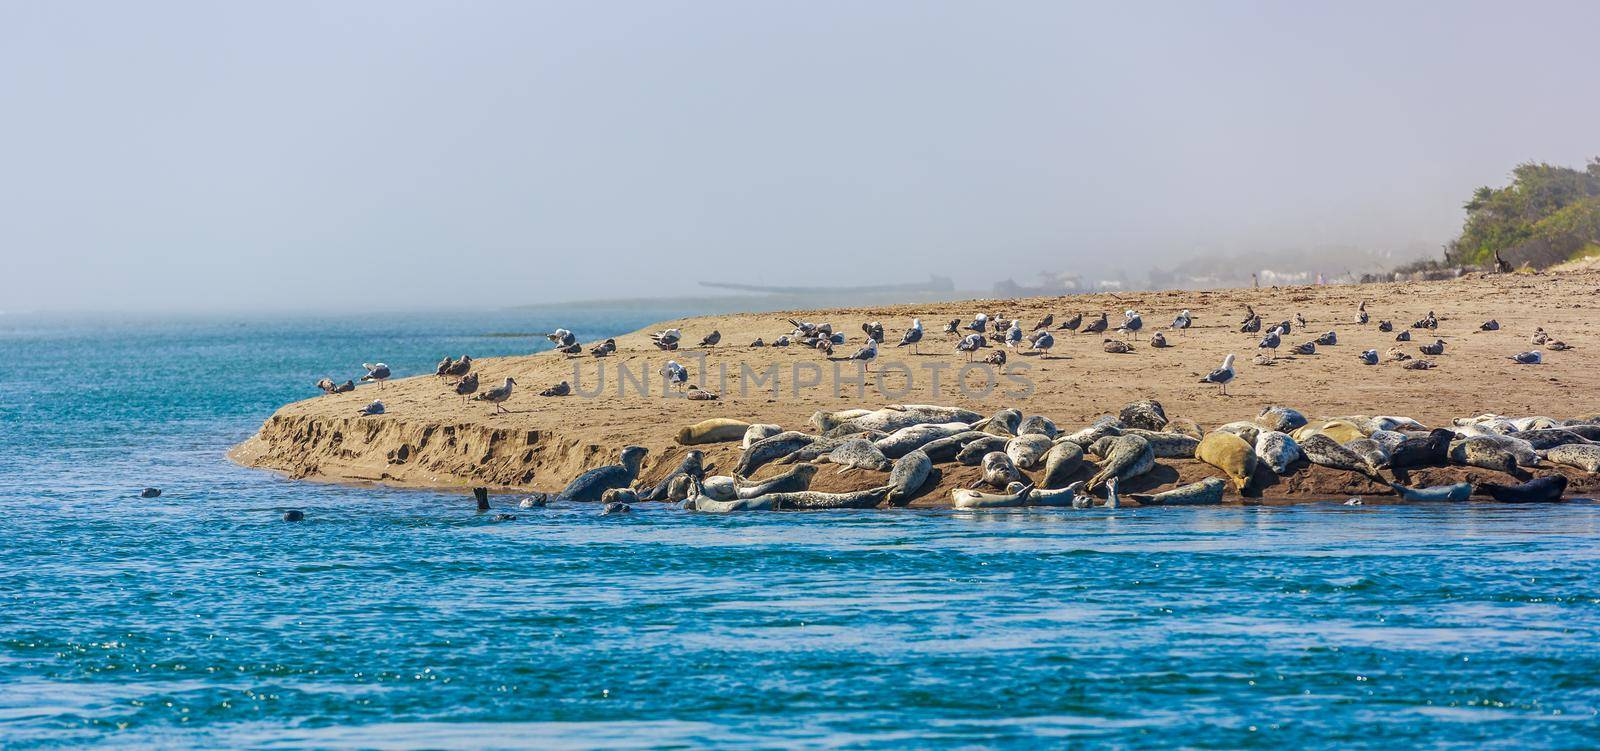 Harbor Seals in a huddle on the coast of Pacific ocean.